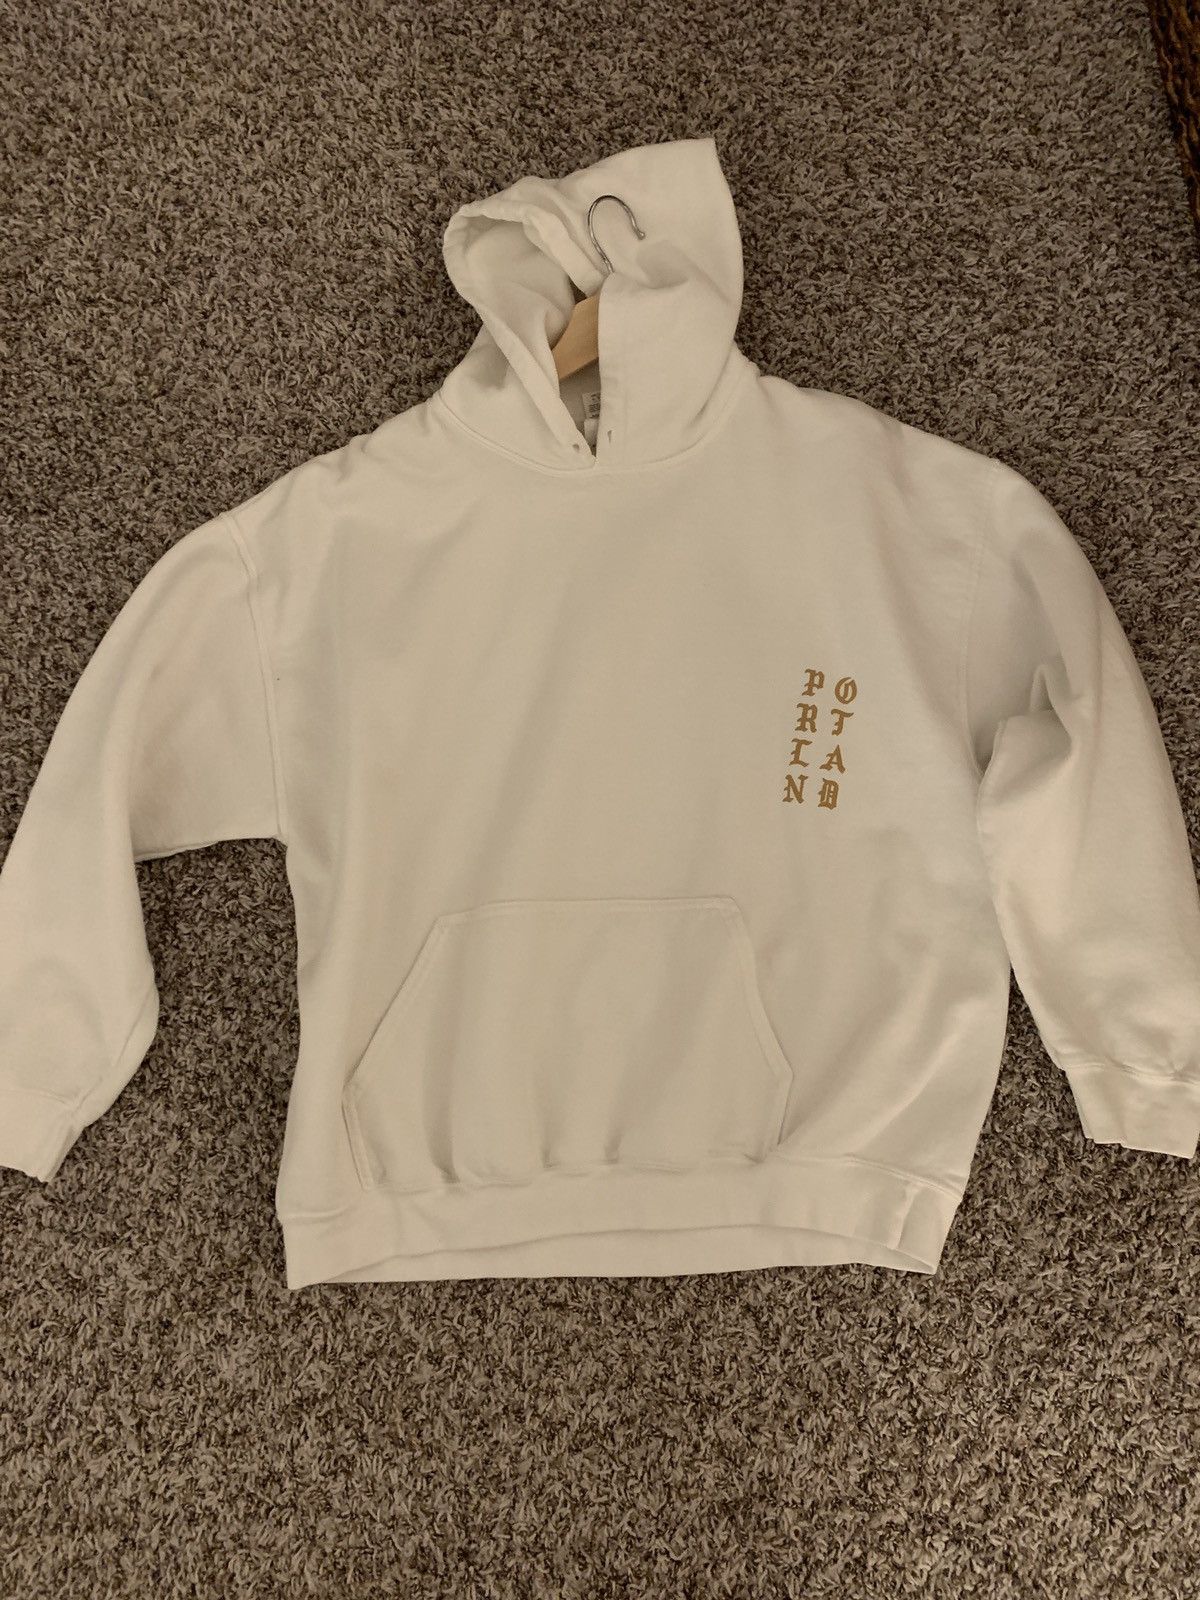 Kanye West Kanye west TLOP Hoodie White Size US XL / EU 56 / 4 - 2 Preview